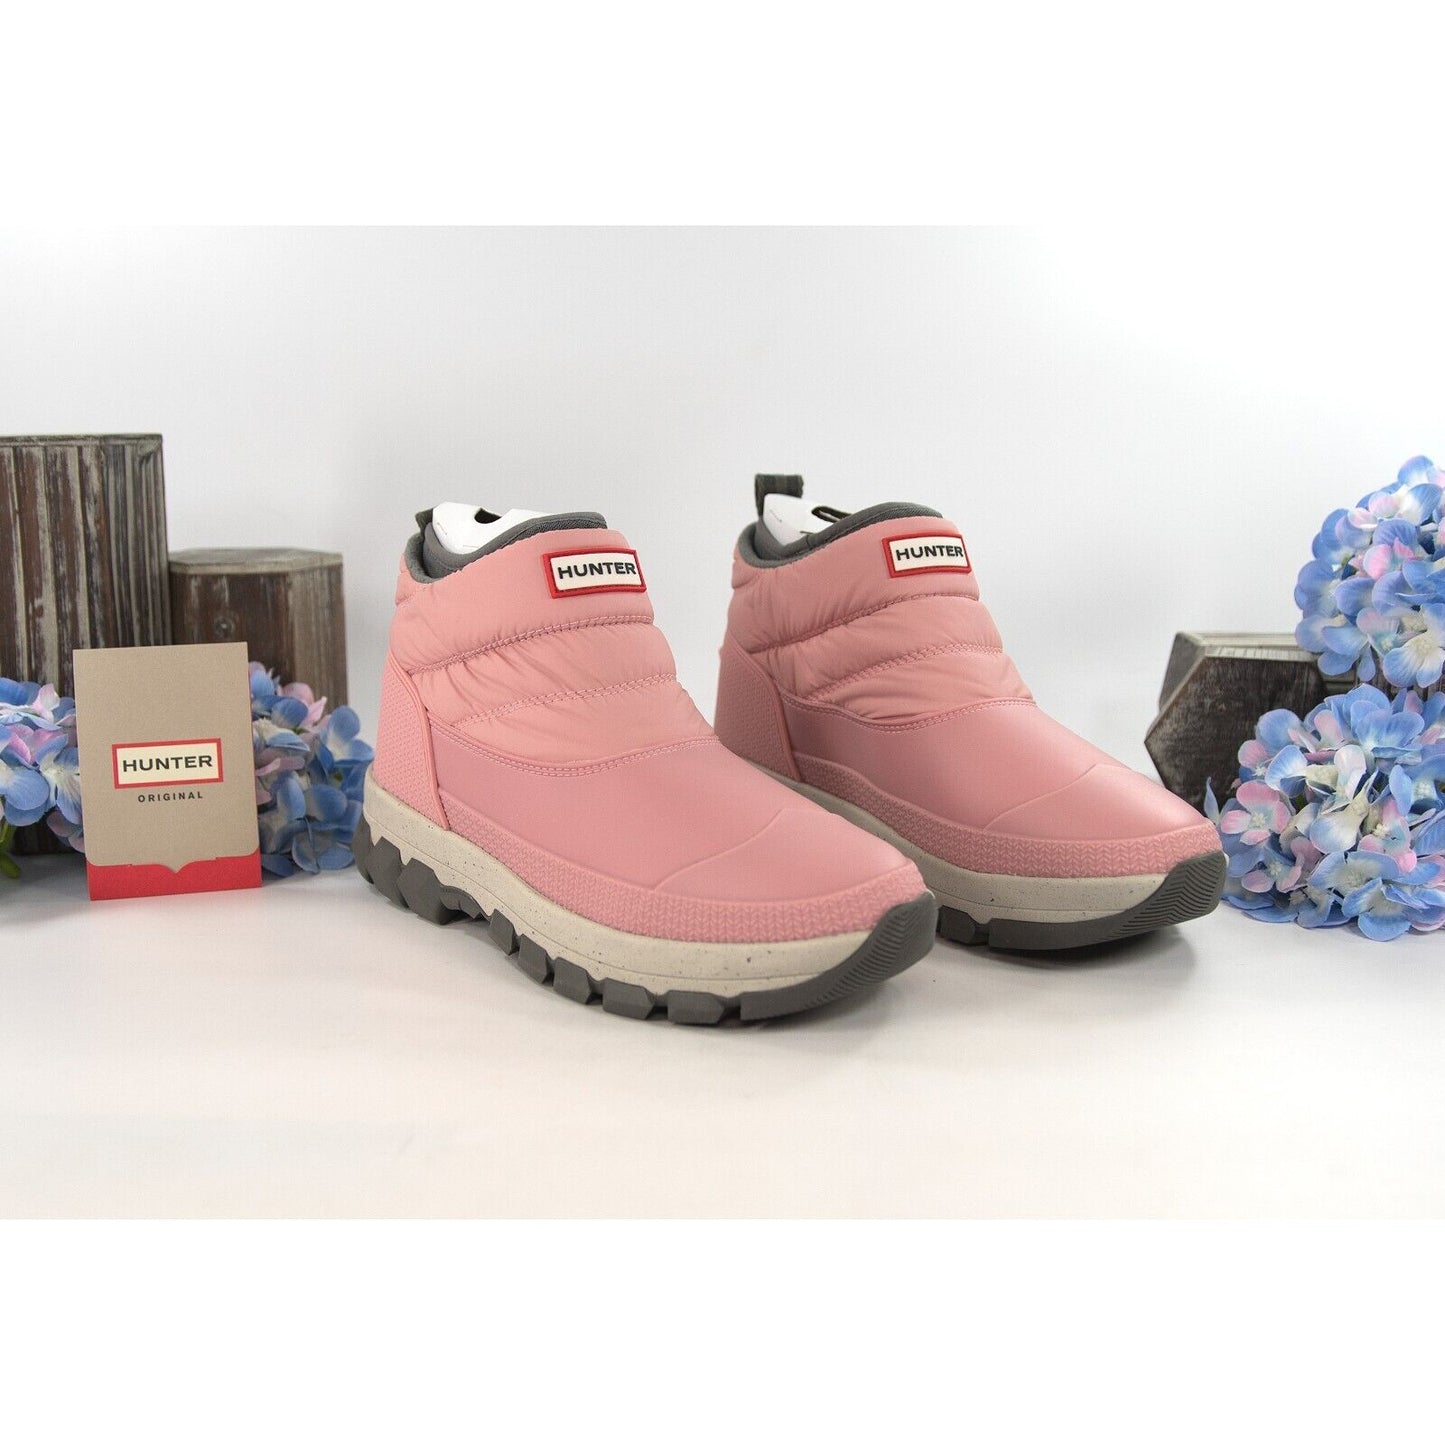 Hunter Boot Company Insulated Quartz Pink Bootie Low Winter Snow Boots 9 NIB